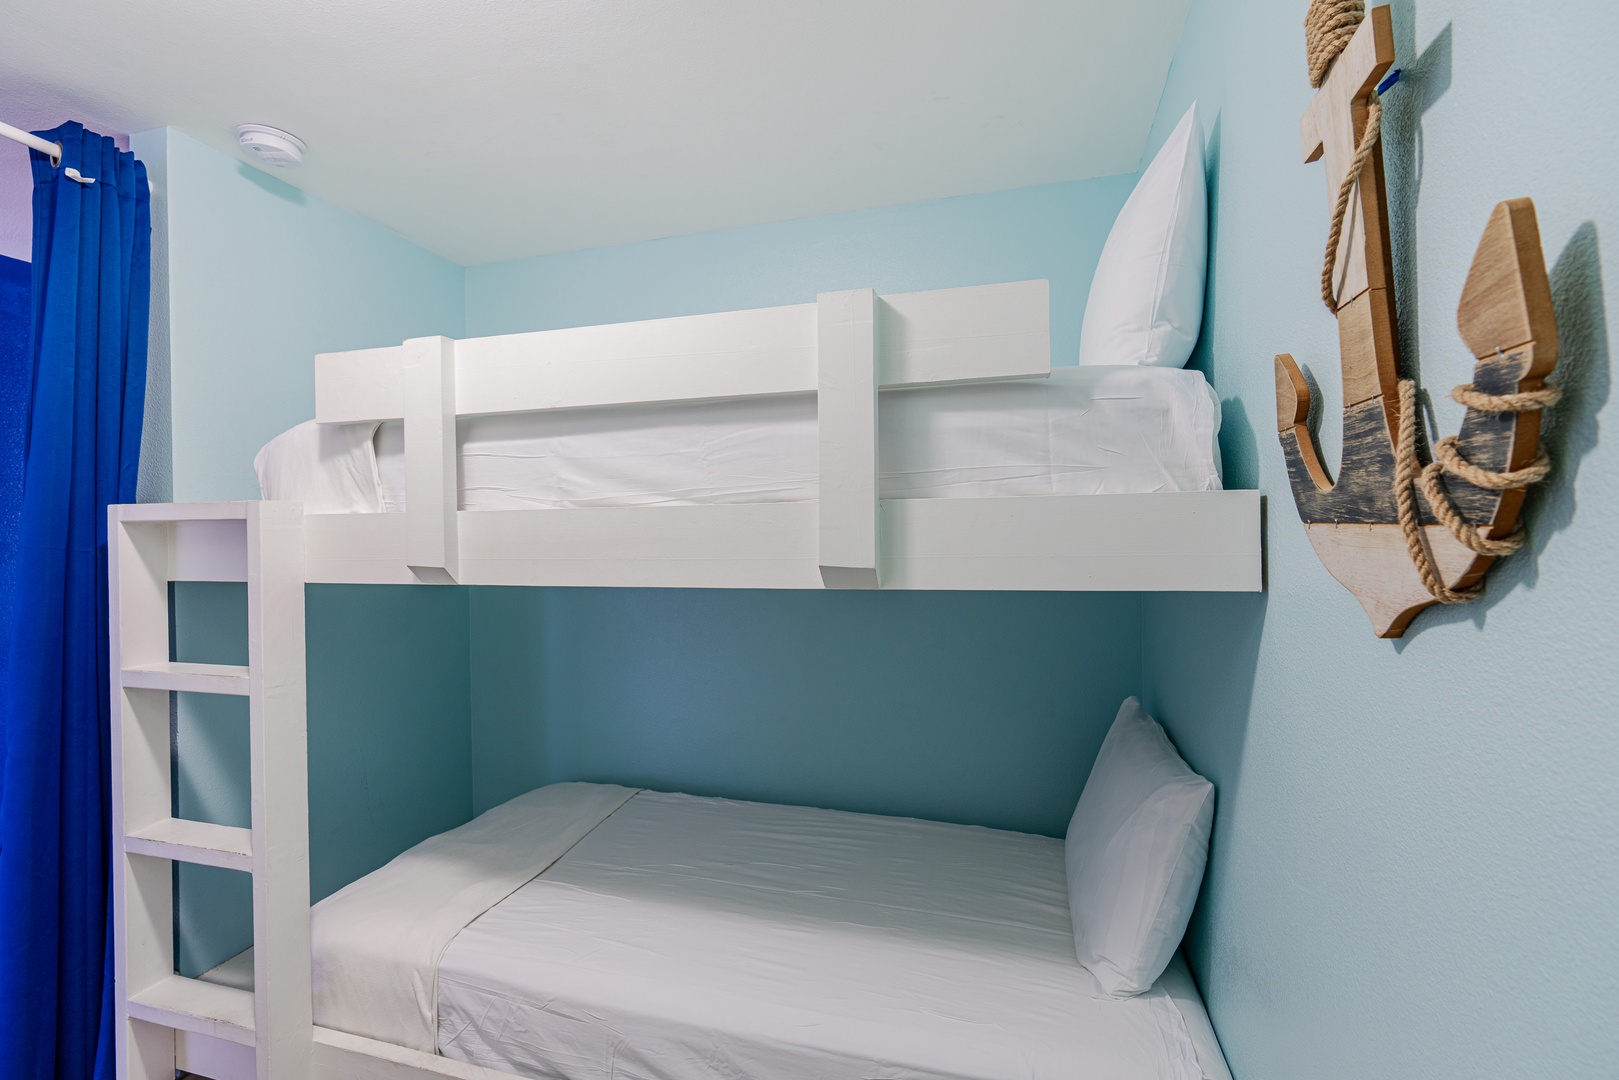 This bonus nook with twin-over-twin bunkbeds is the perfect relaxation spot